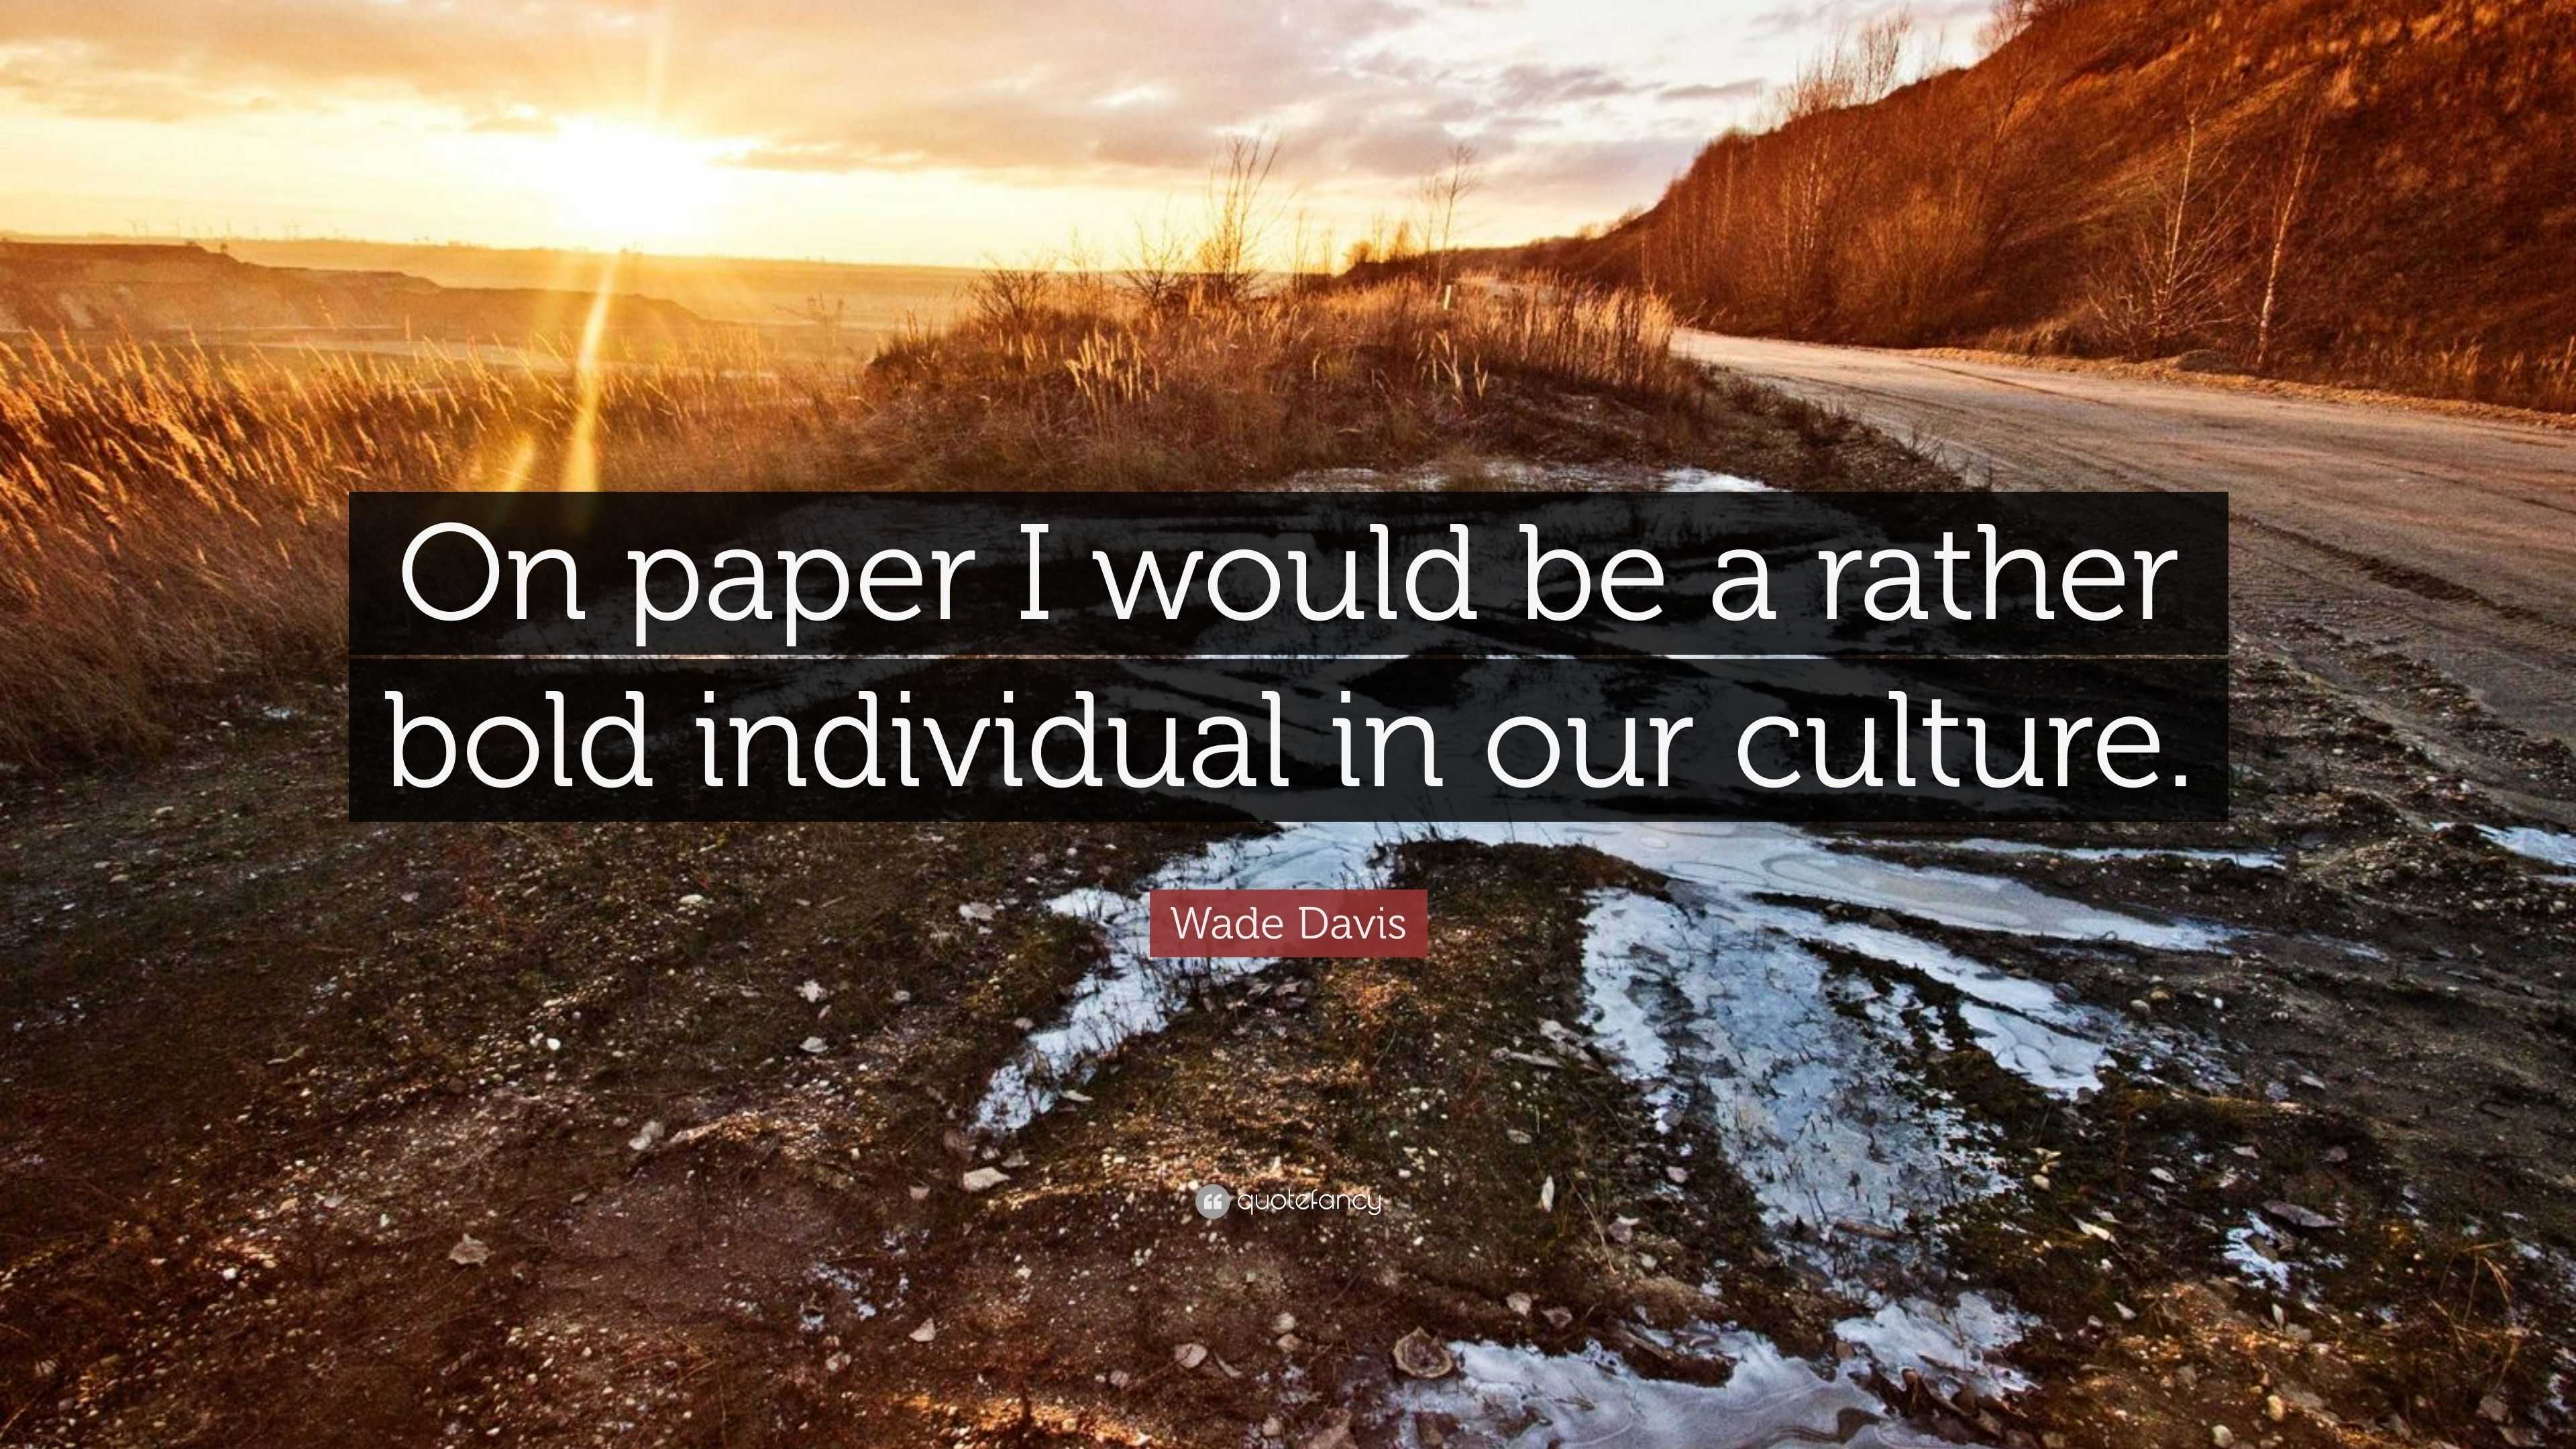 Wade Davis Quote: “On paper I would be a rather bold individual in our ...